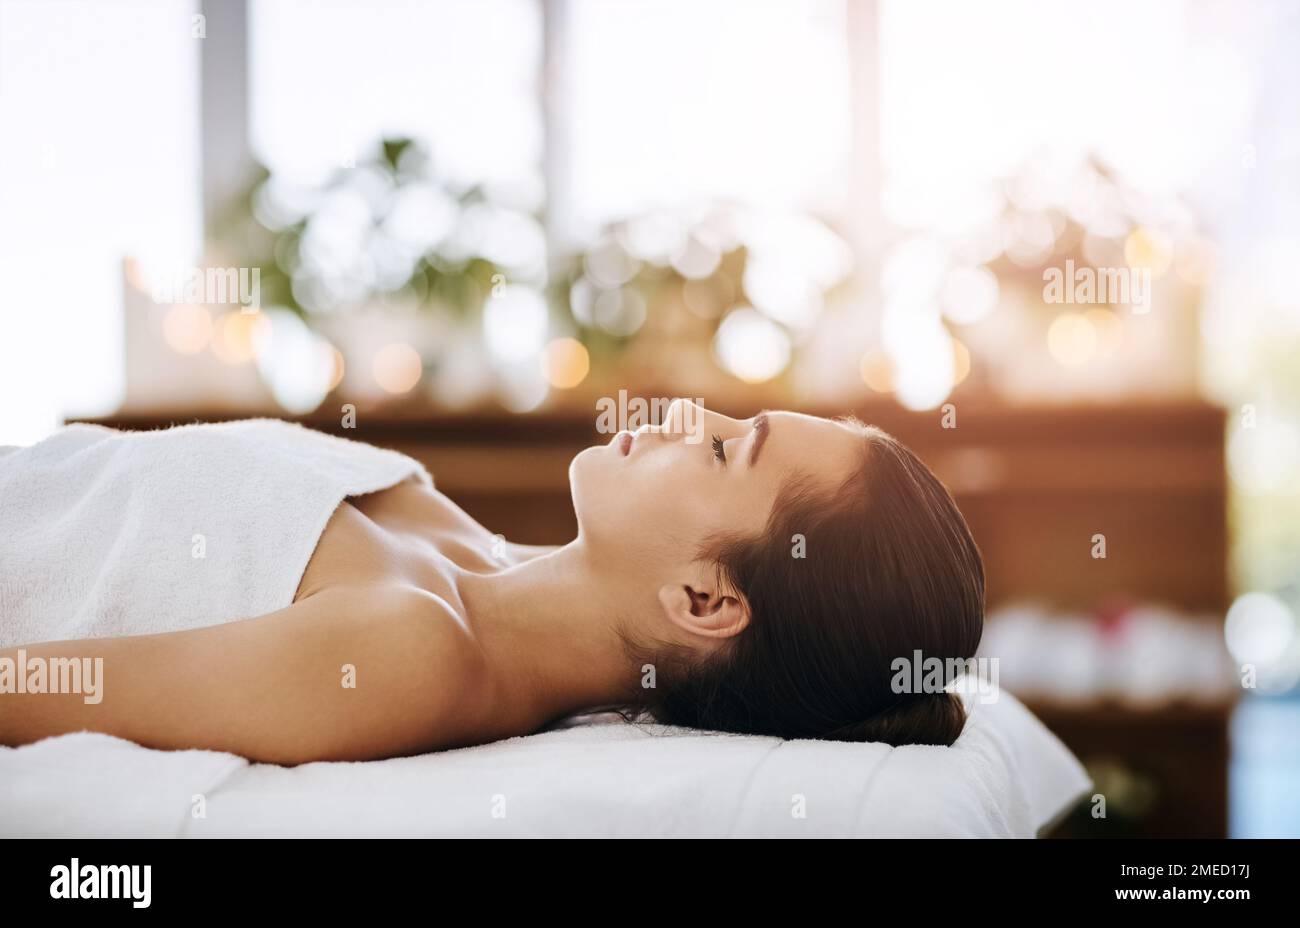 Everyone deserves to be pampered. an attractive young woman getting pampered at a beauty spa. Stock Photo